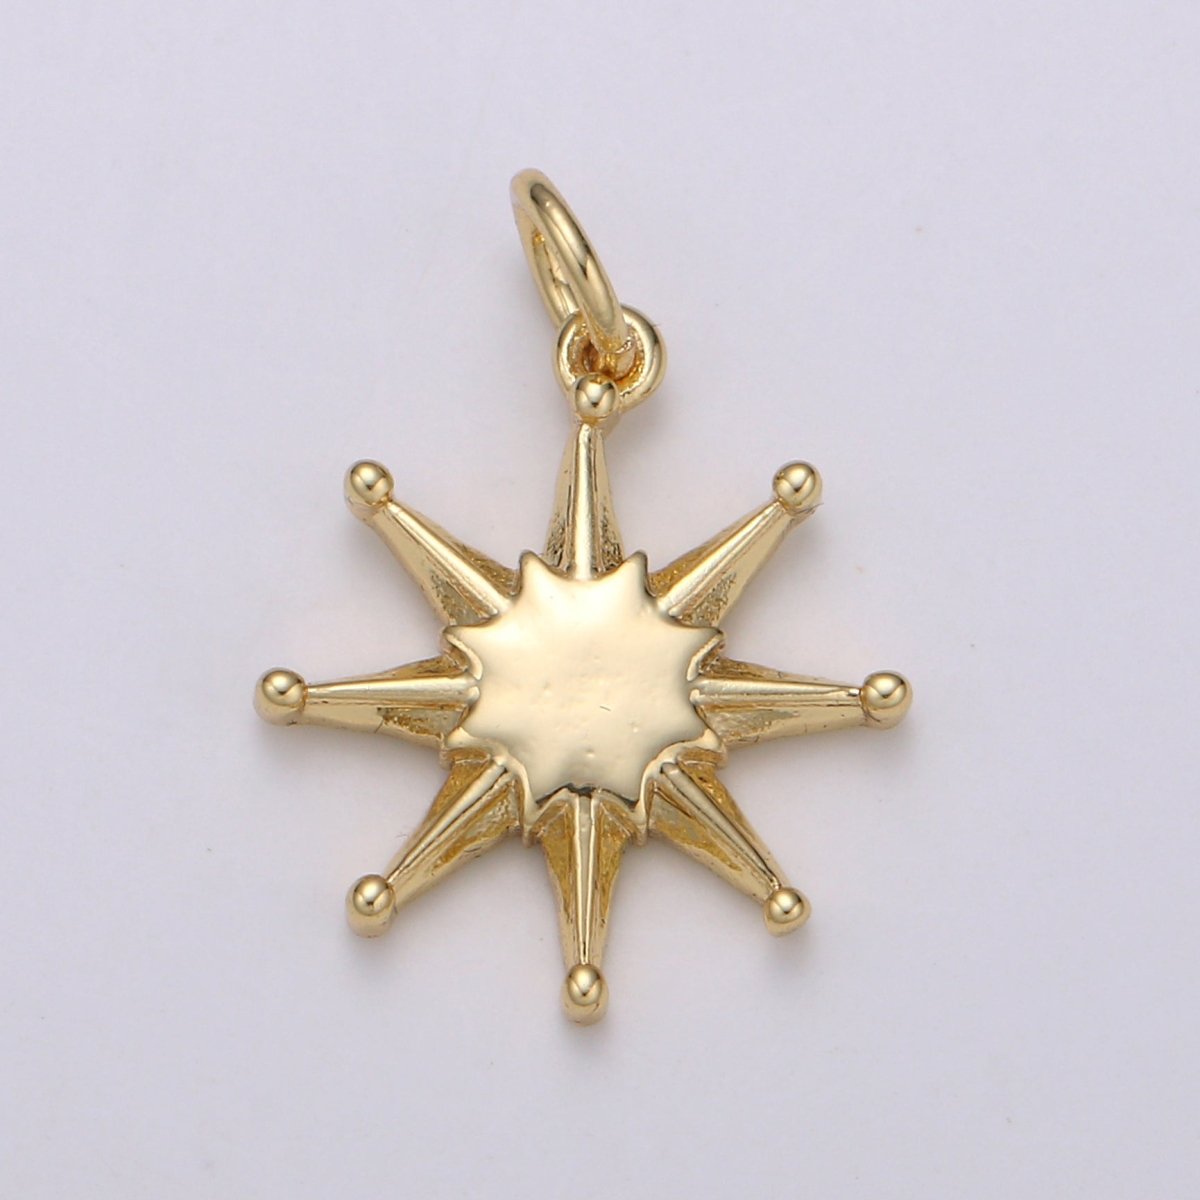 14K Gold Filled Shining Star Pendant Shining Star Charm, Celestial Jewelry Northern Star ChaRM Eight Point Star Charm E-055 - DLUXCA